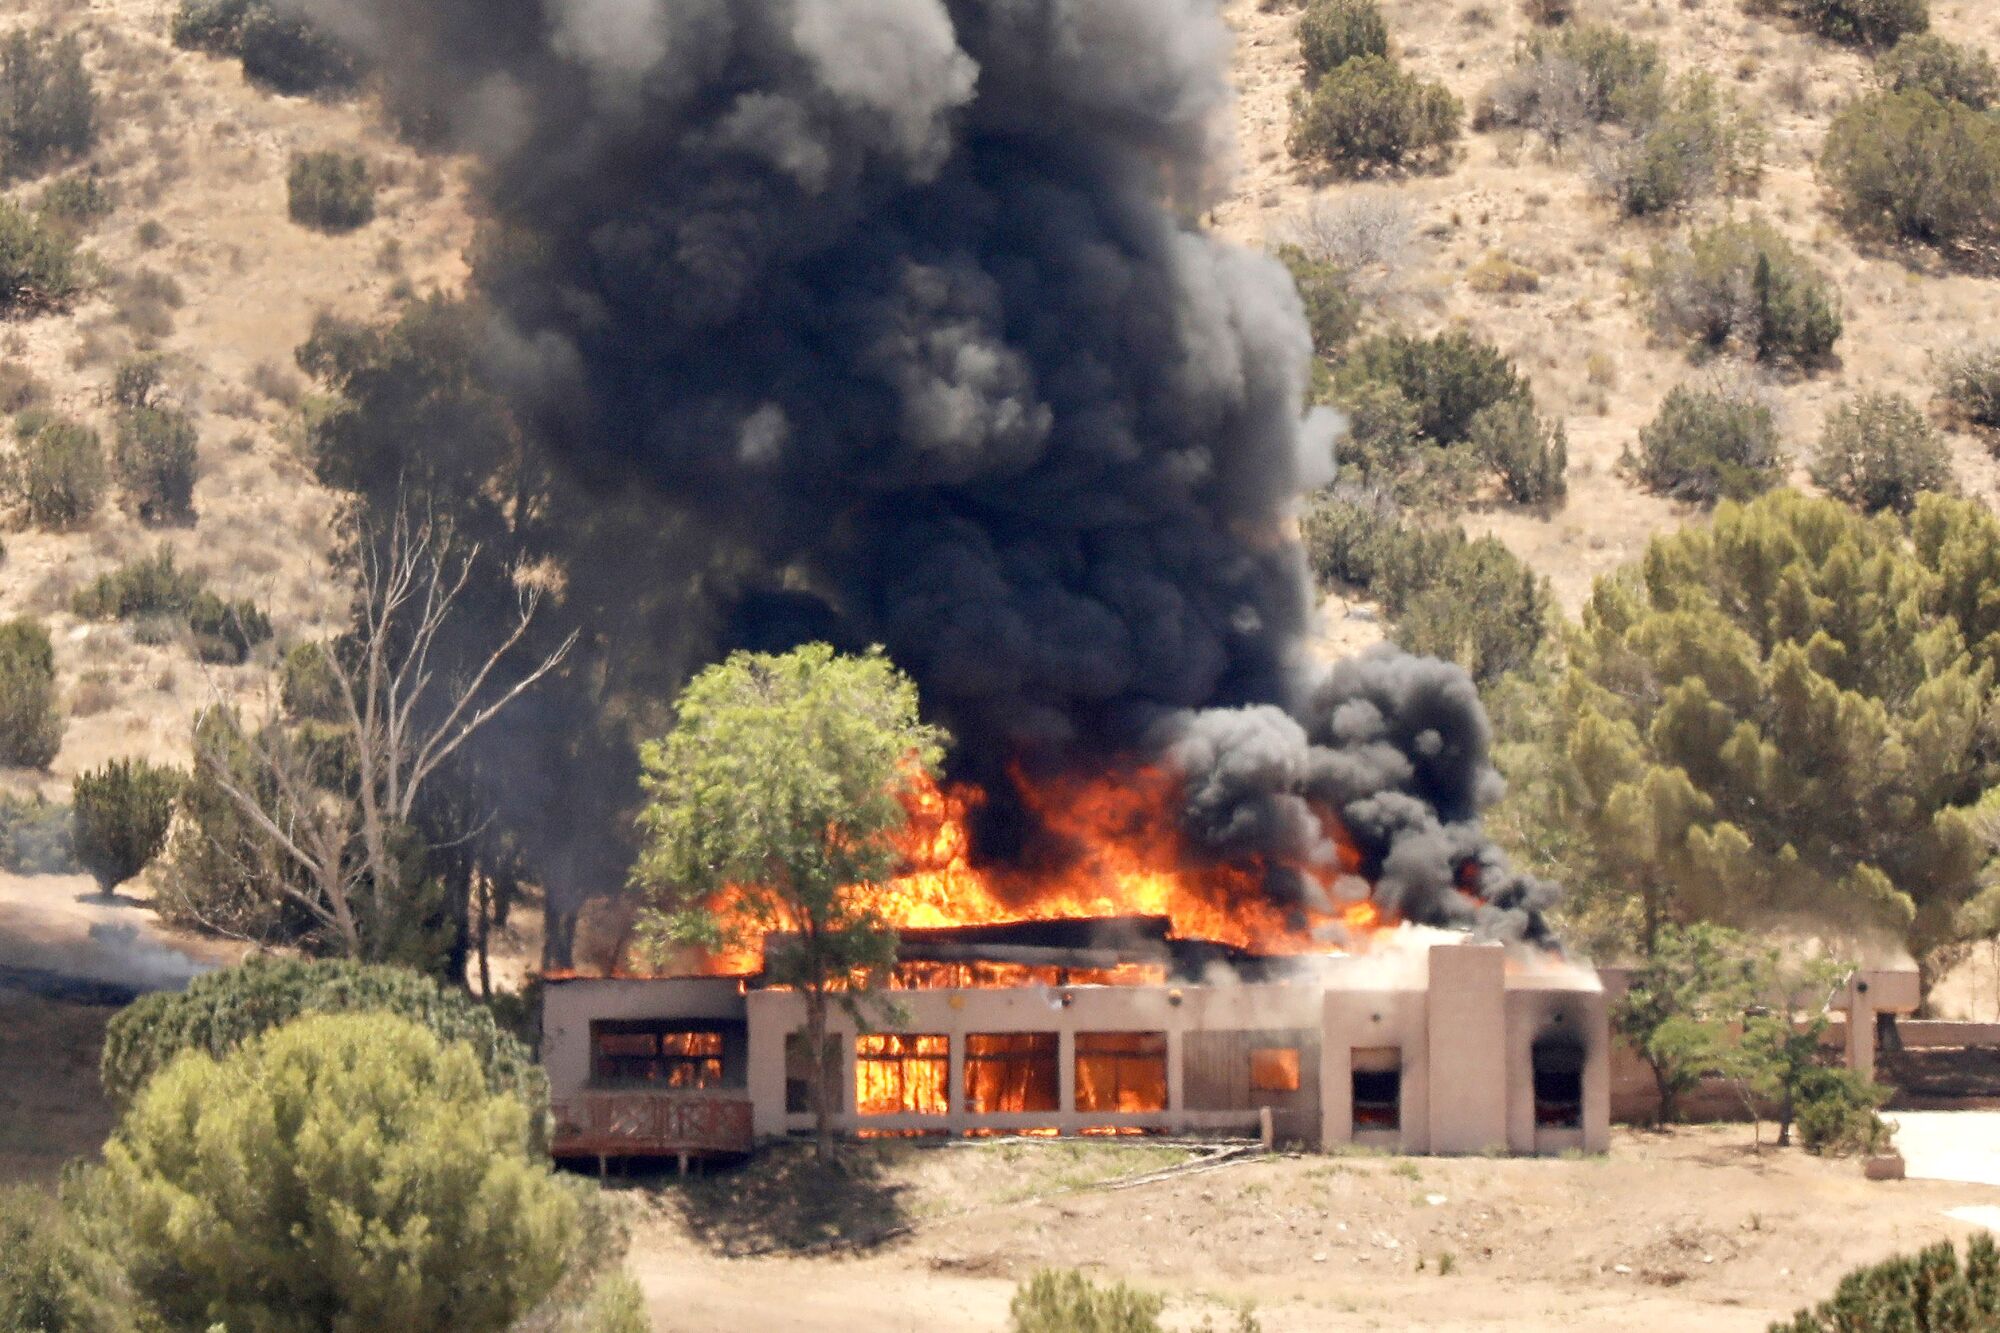 Bright orange flames fill a house on a sparsely vegetated hillside and send up a plume of black smoke.